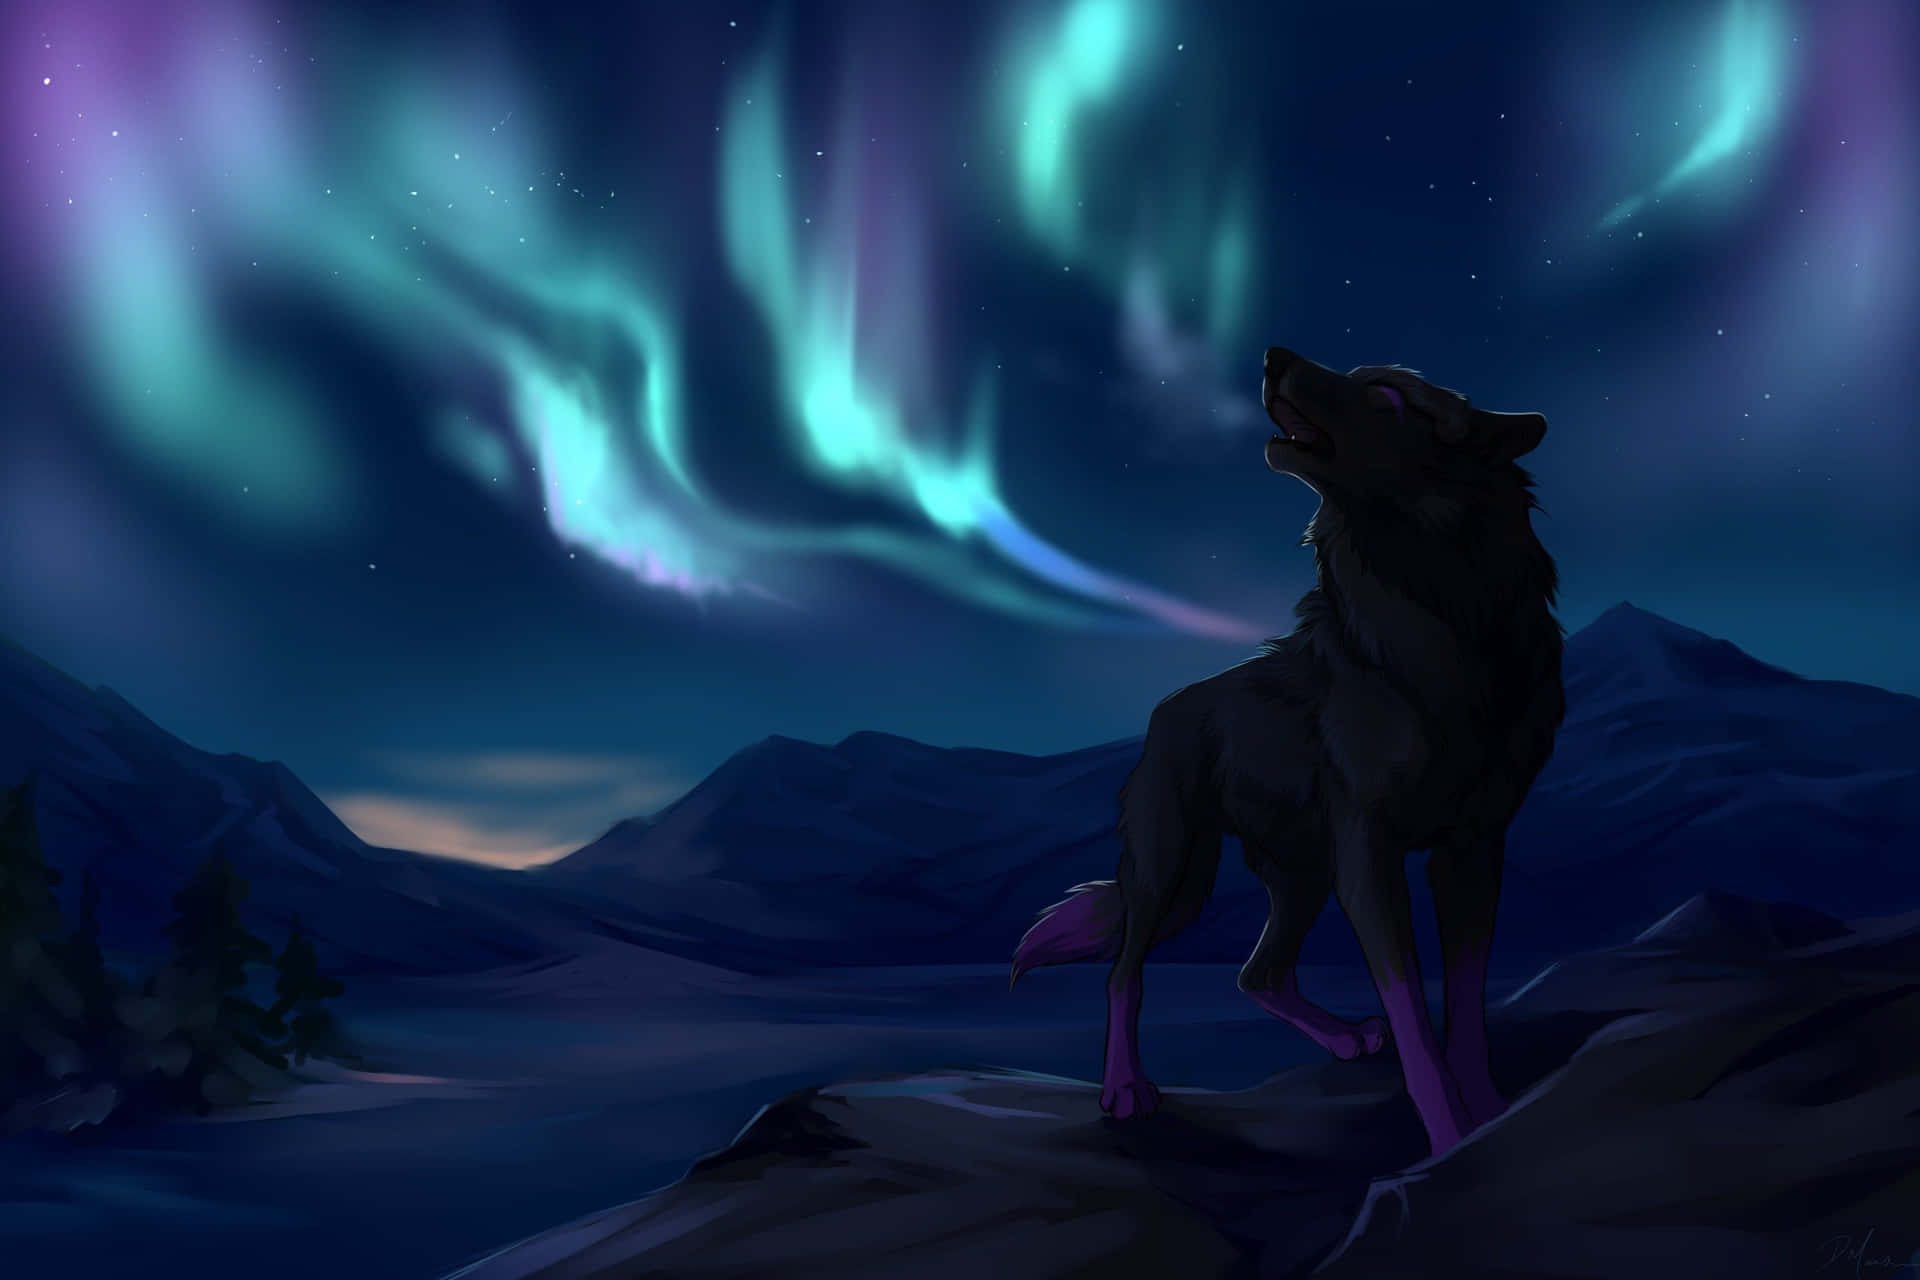 From Howling to Roaming - An Awesome Anime Wolf Wallpaper